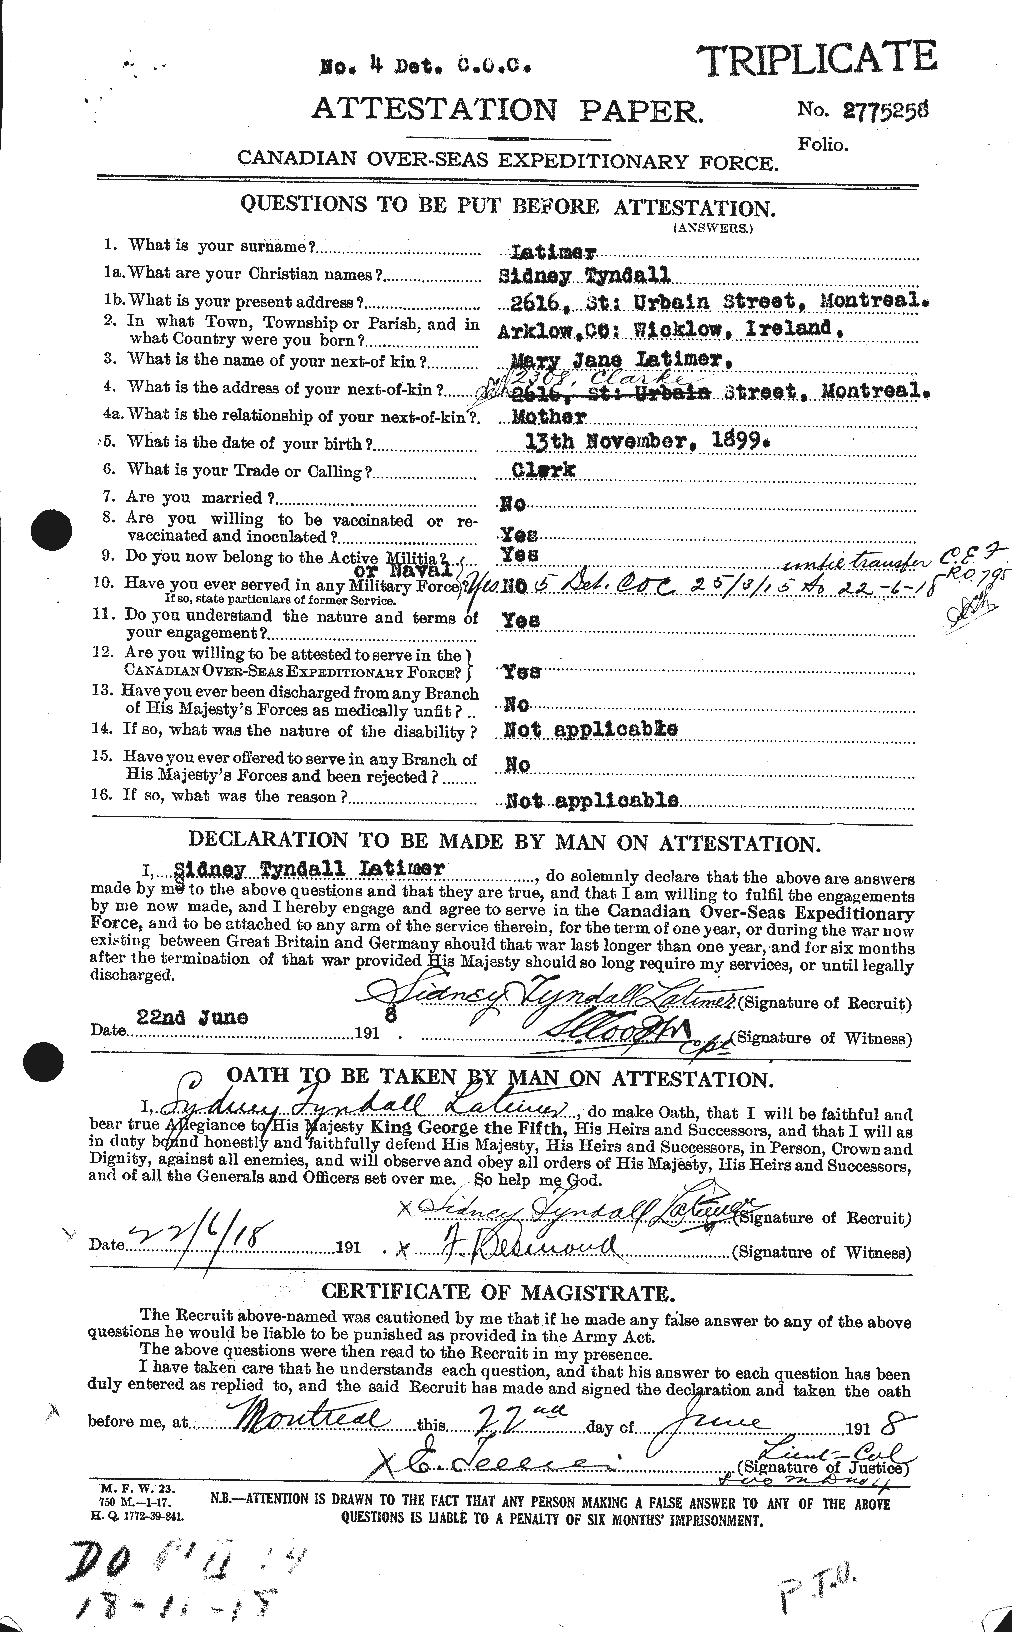 Personnel Records of the First World War - CEF 455176a